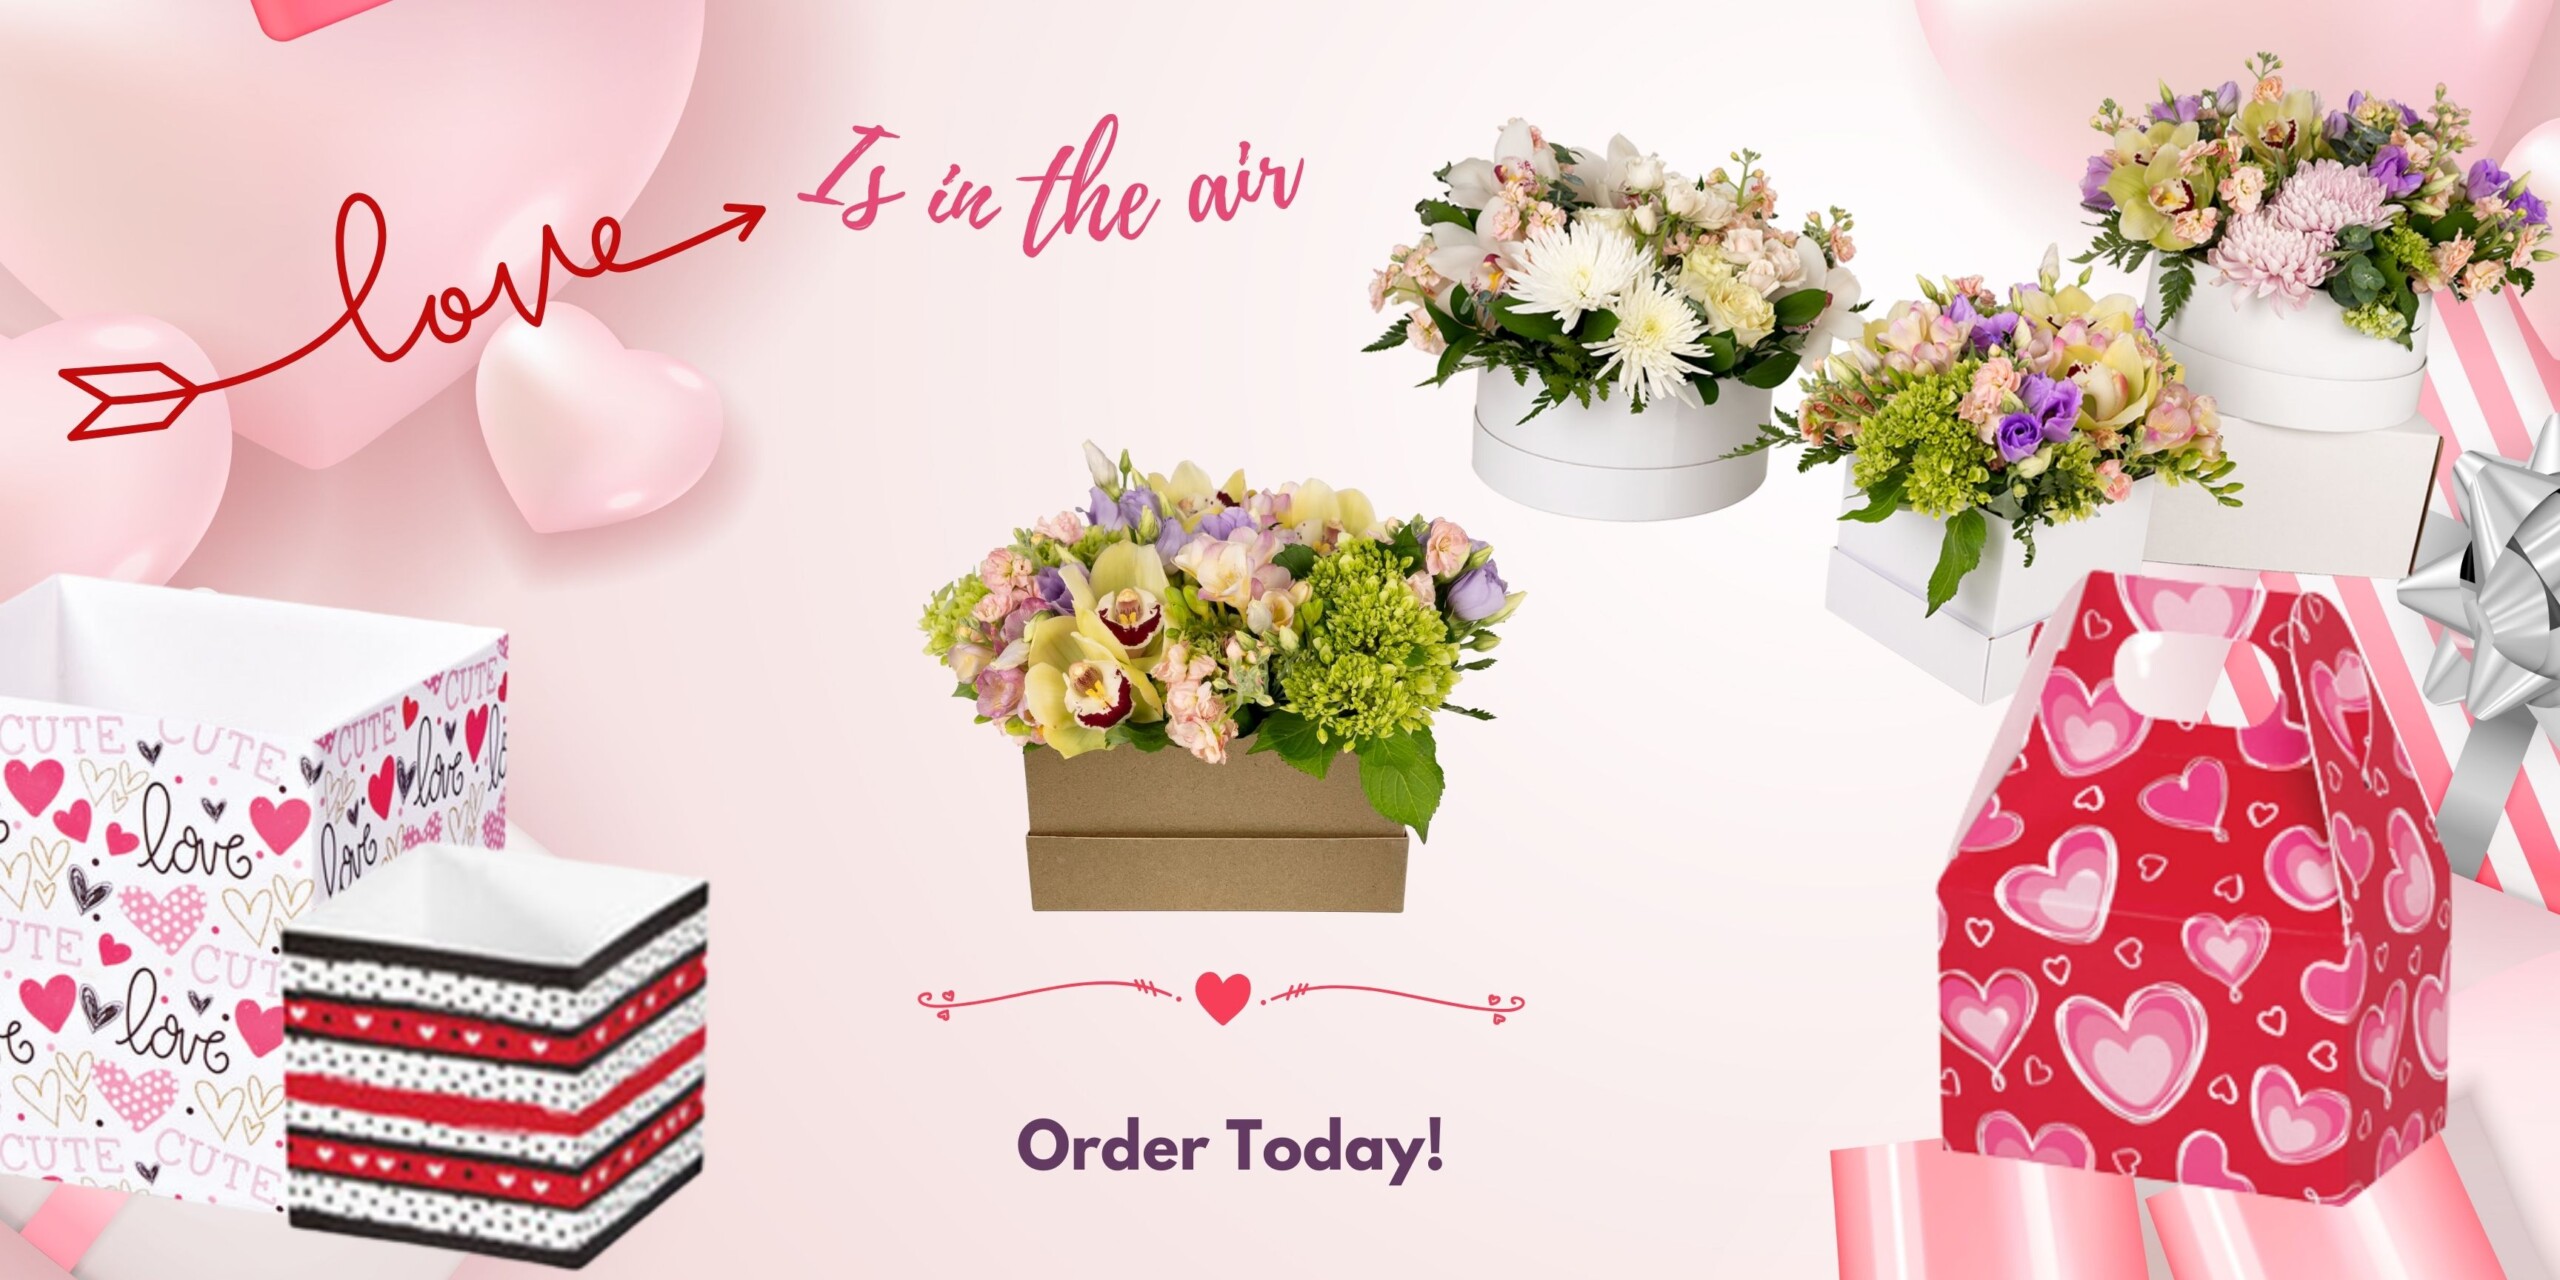 Photos of Valentine's Day packaging, flower boxes, gable boxes